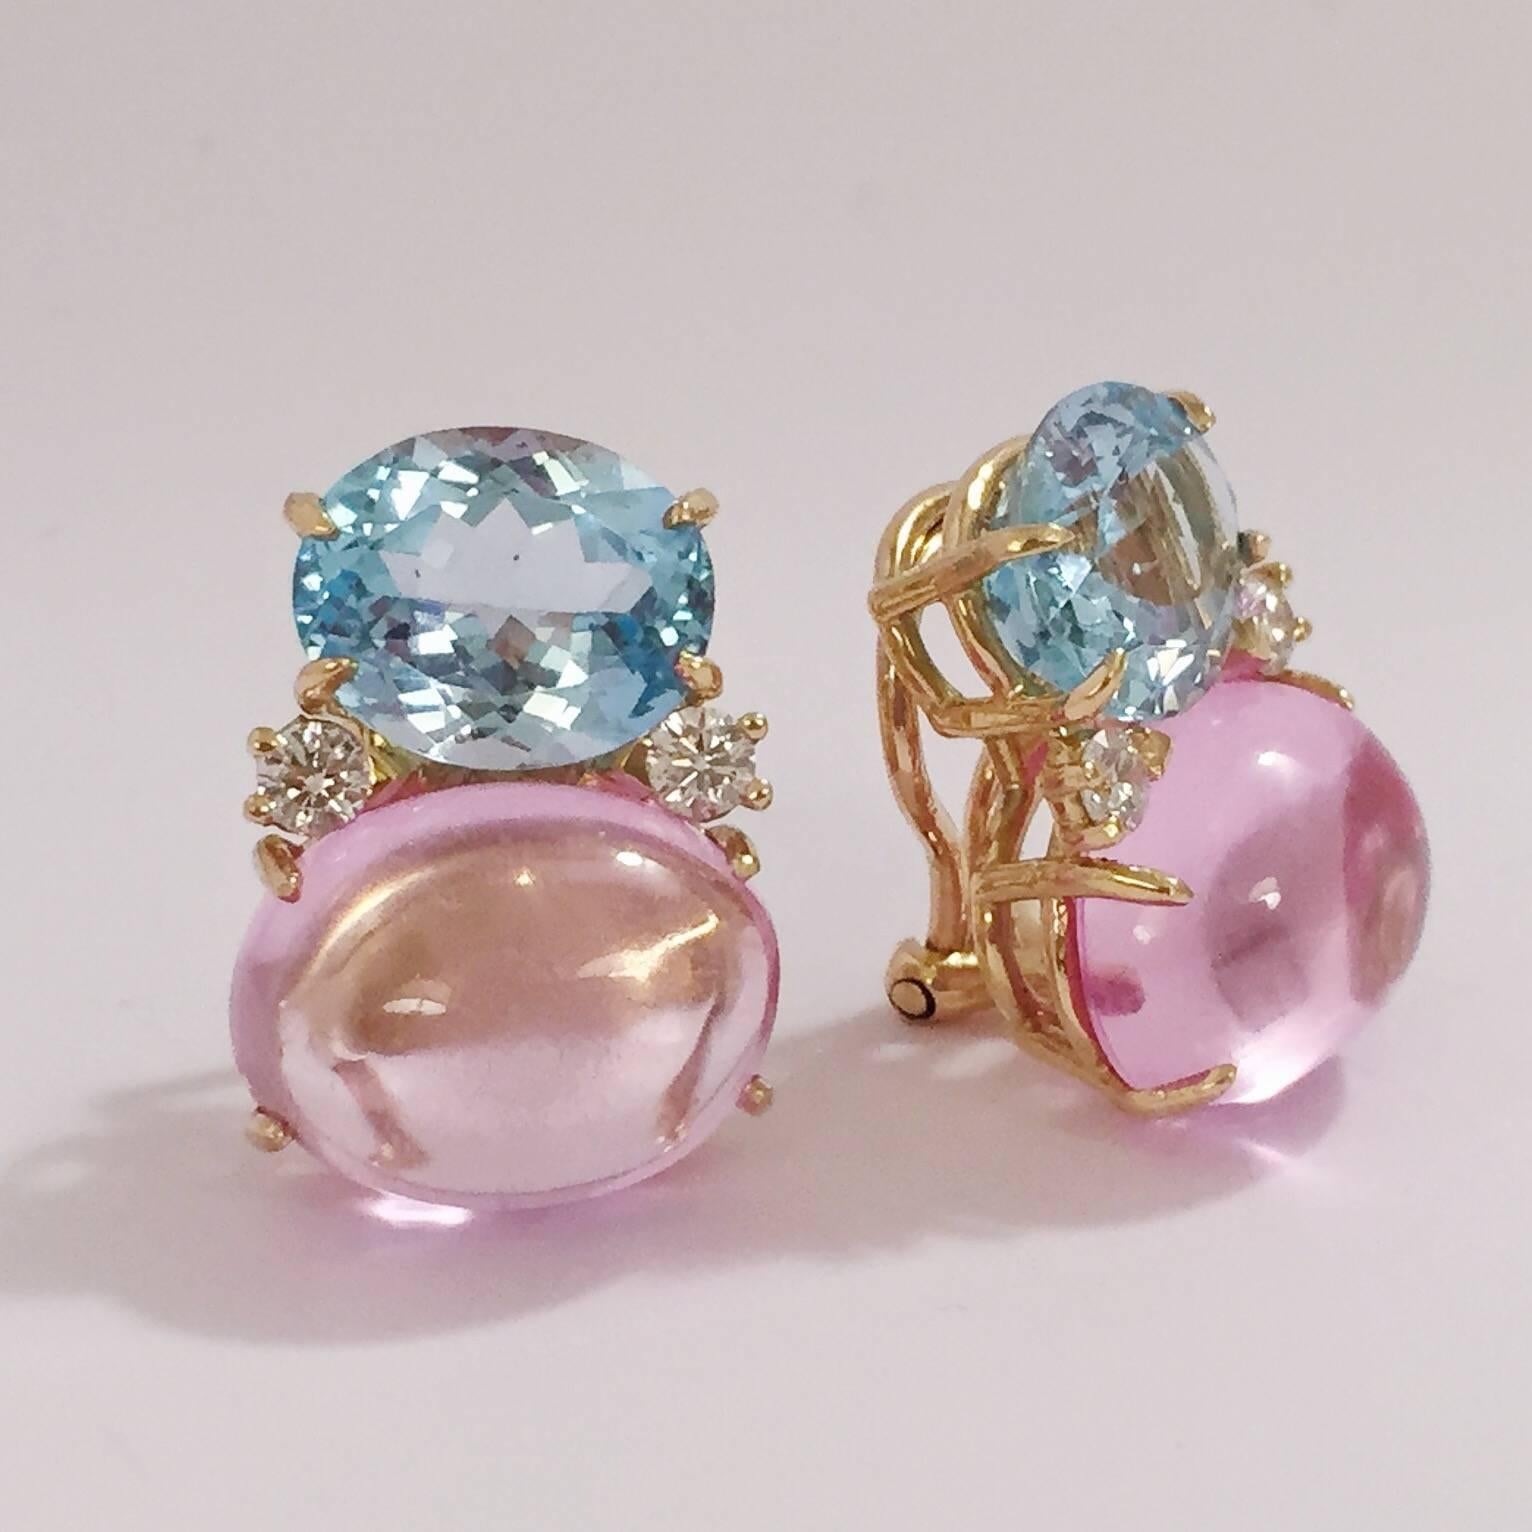 18kt Yellow Gold Large GUM DROP™ Earrings with faceted Blue Topaz and cabochon Pink Topaz and diamonds. The Top oval Blue Topaz is approximately 5 cts each and the Bottom cabochon Pink Topaz is approximately 12 cts each, and 4 diamonds weighing